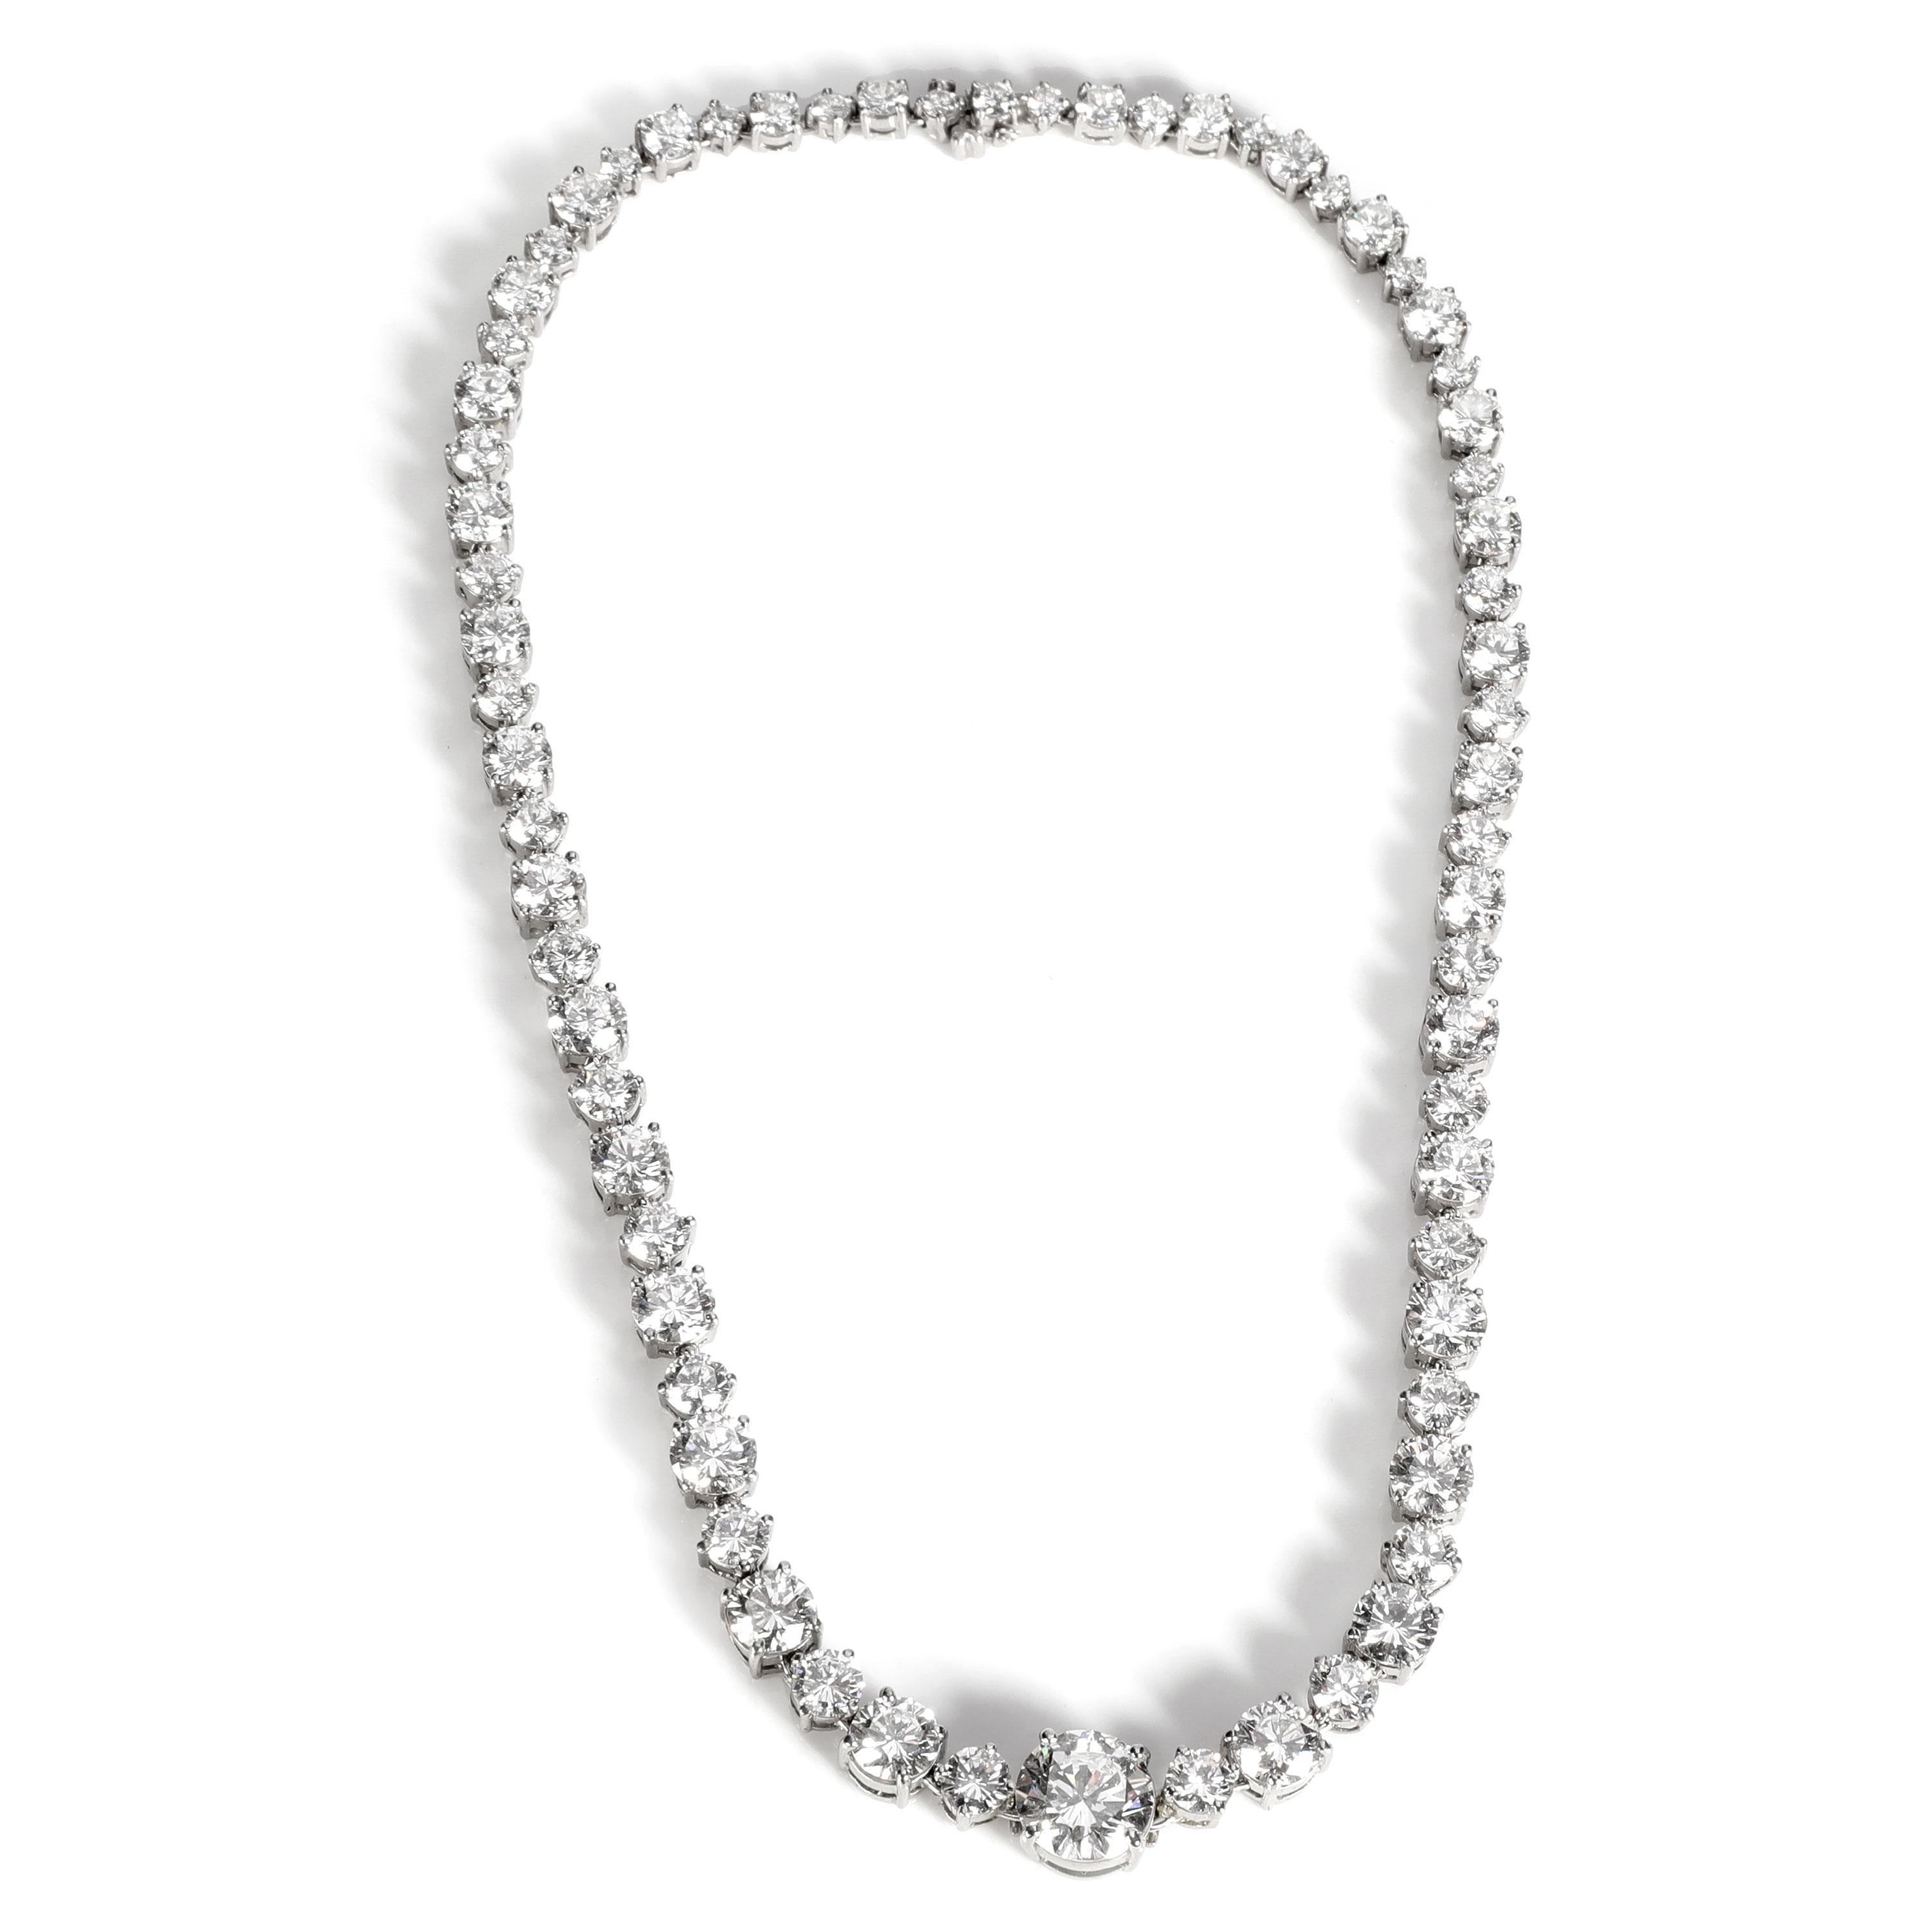 SKU: 109296
Listing Title: Harry Winston Riviera Diamond Tennis Necklace in Platinum GIA E VS1 23.11 CTW
Condition Description: Retails for 225,000 USD. In excellent condition. Comes with Pouch, Certificate of Authenticity, GIA Certificate.